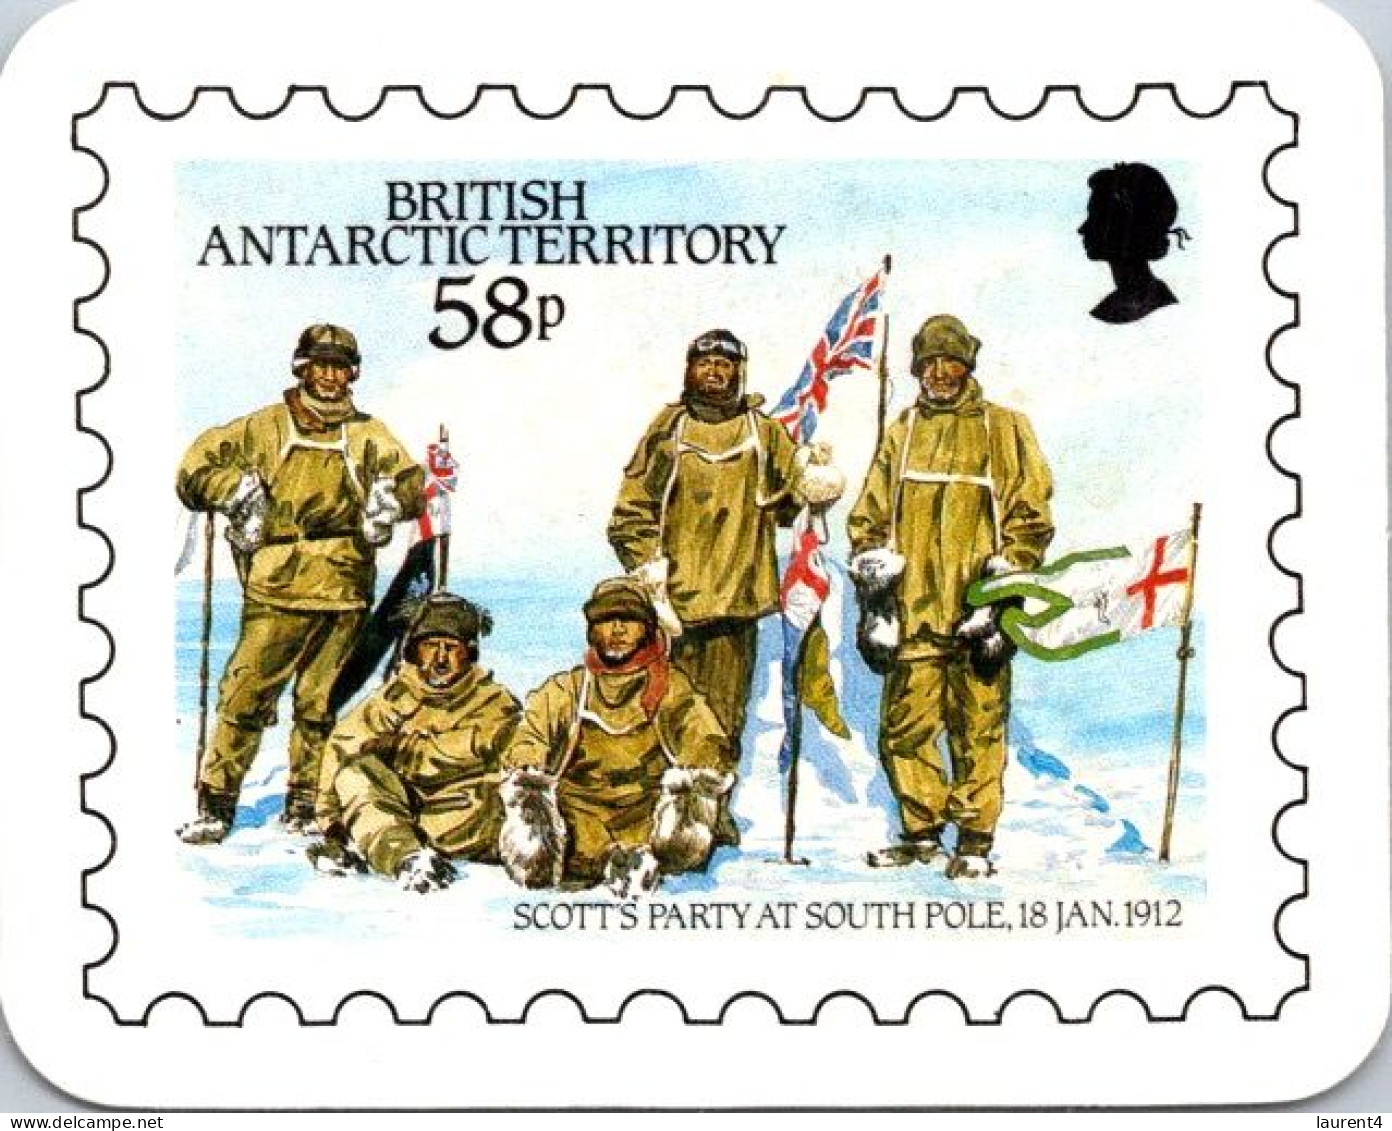 21-4-2024 (2 Z 36) Antarctic Stamp Reproduction (on Mini-calender) X 2 (different) - Stamps (pictures)